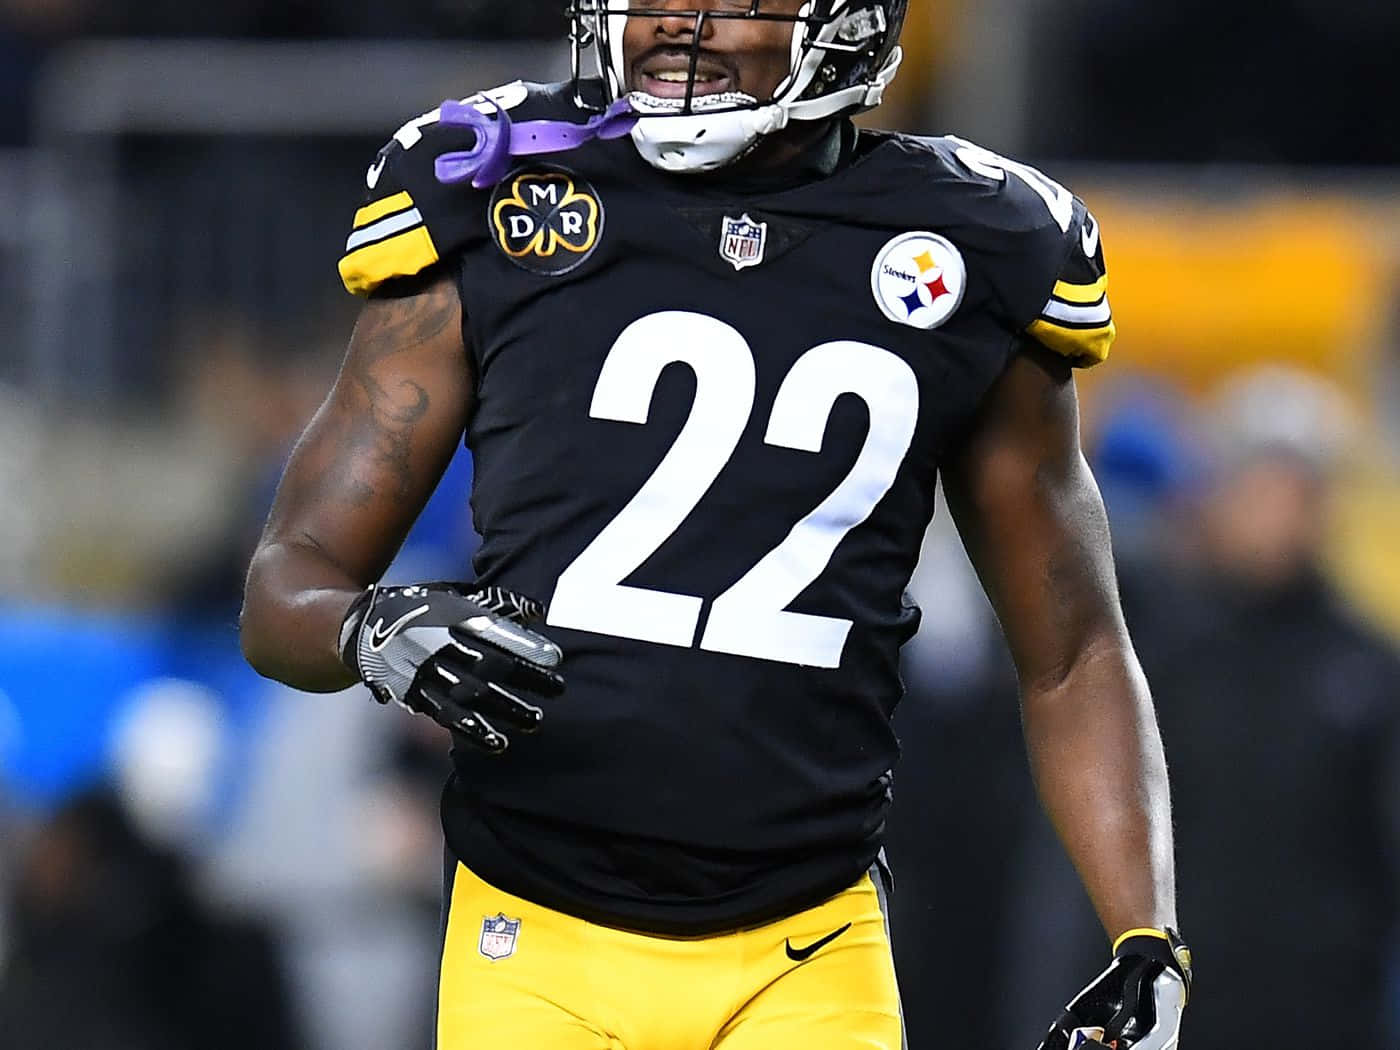 Pittsburgh Steelers Player Number22 Wallpaper